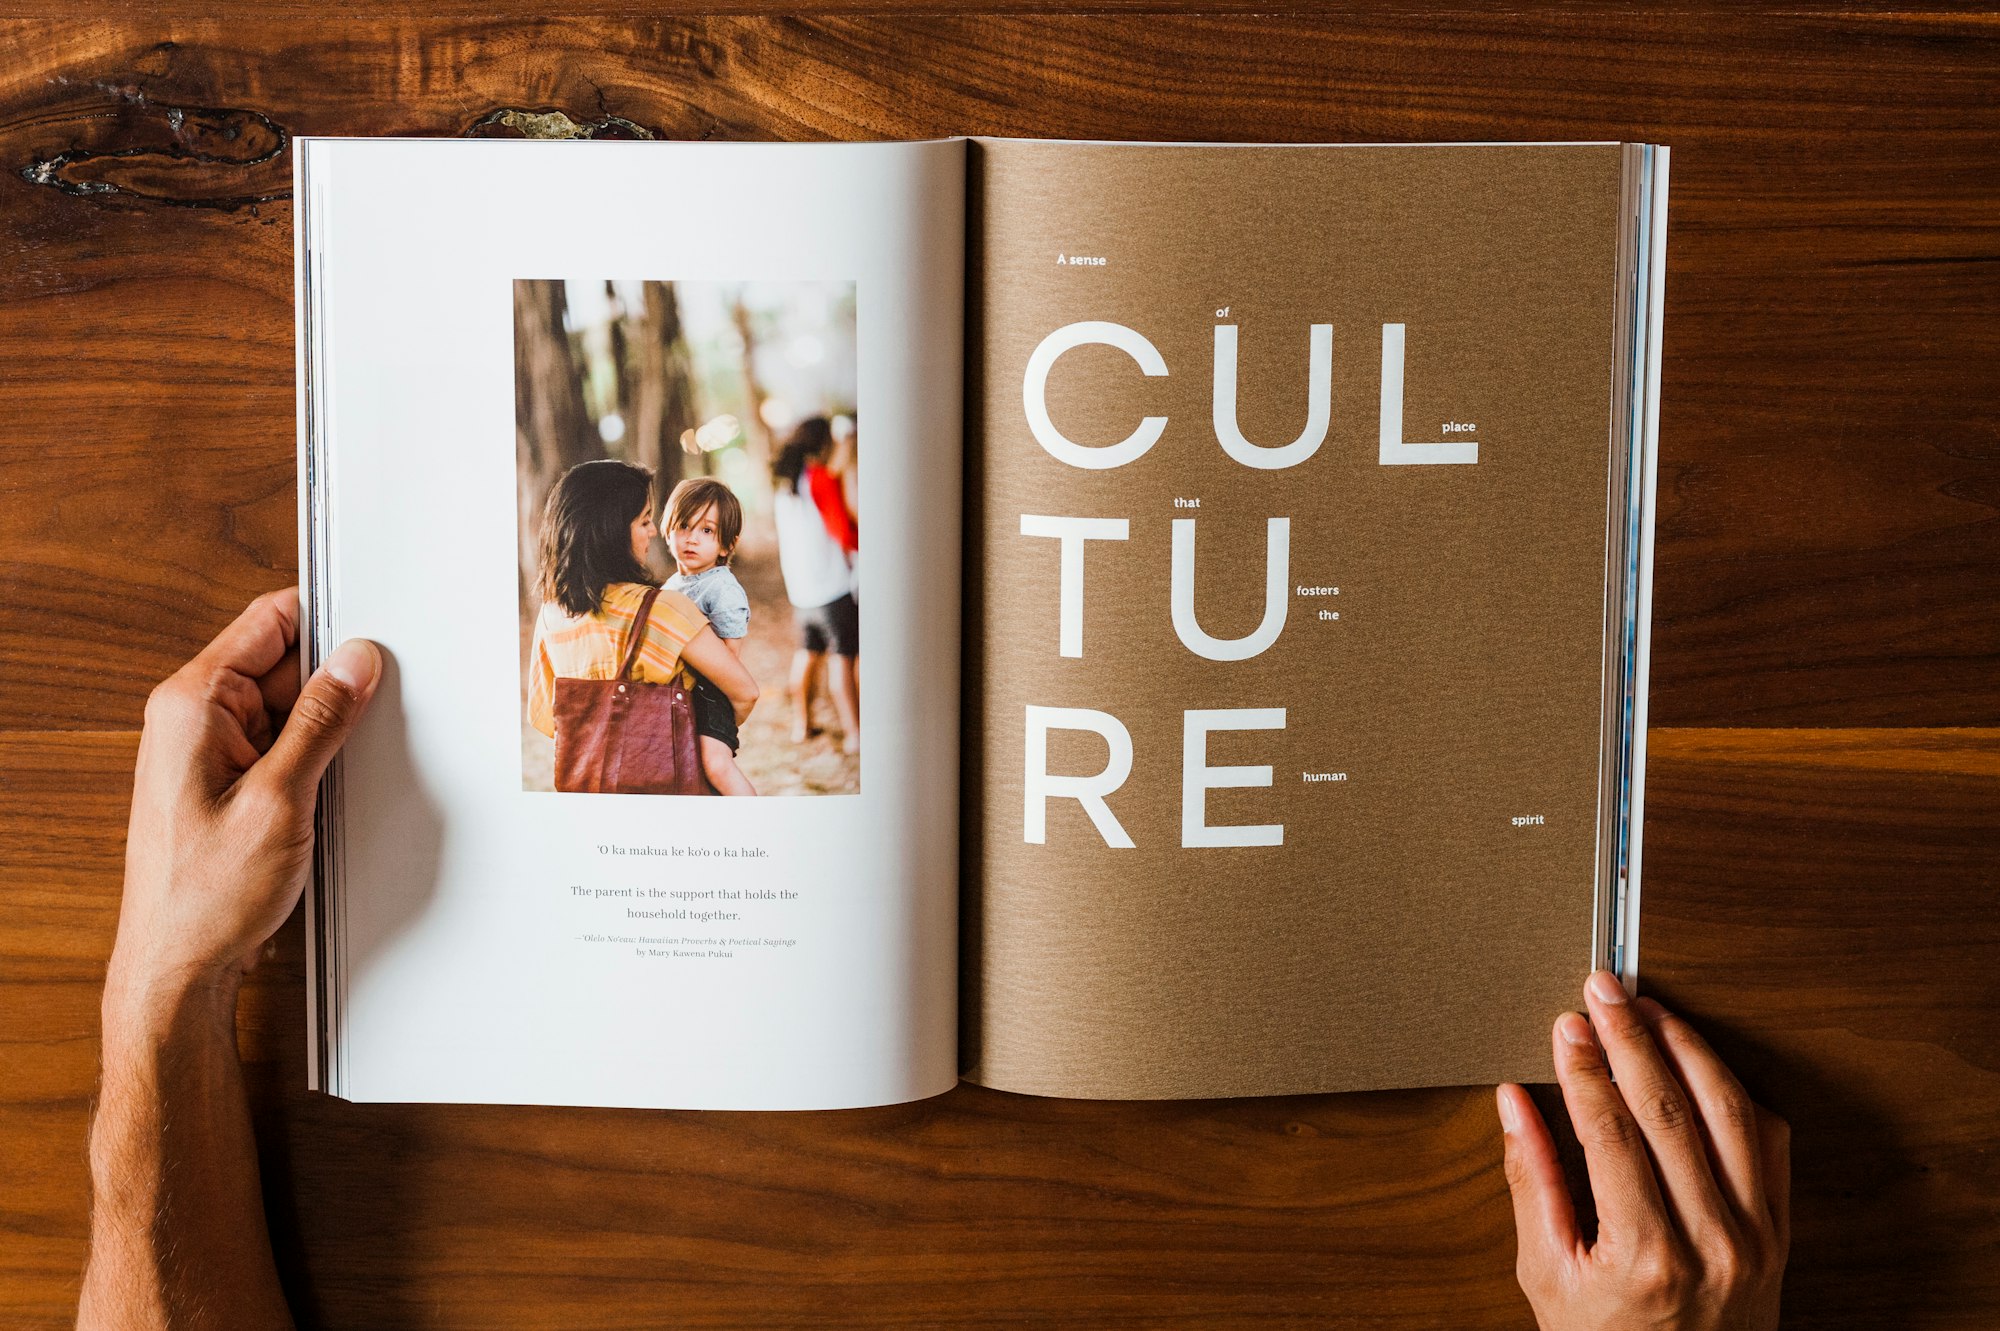 A story about culture in a magazine published by NMG Network.